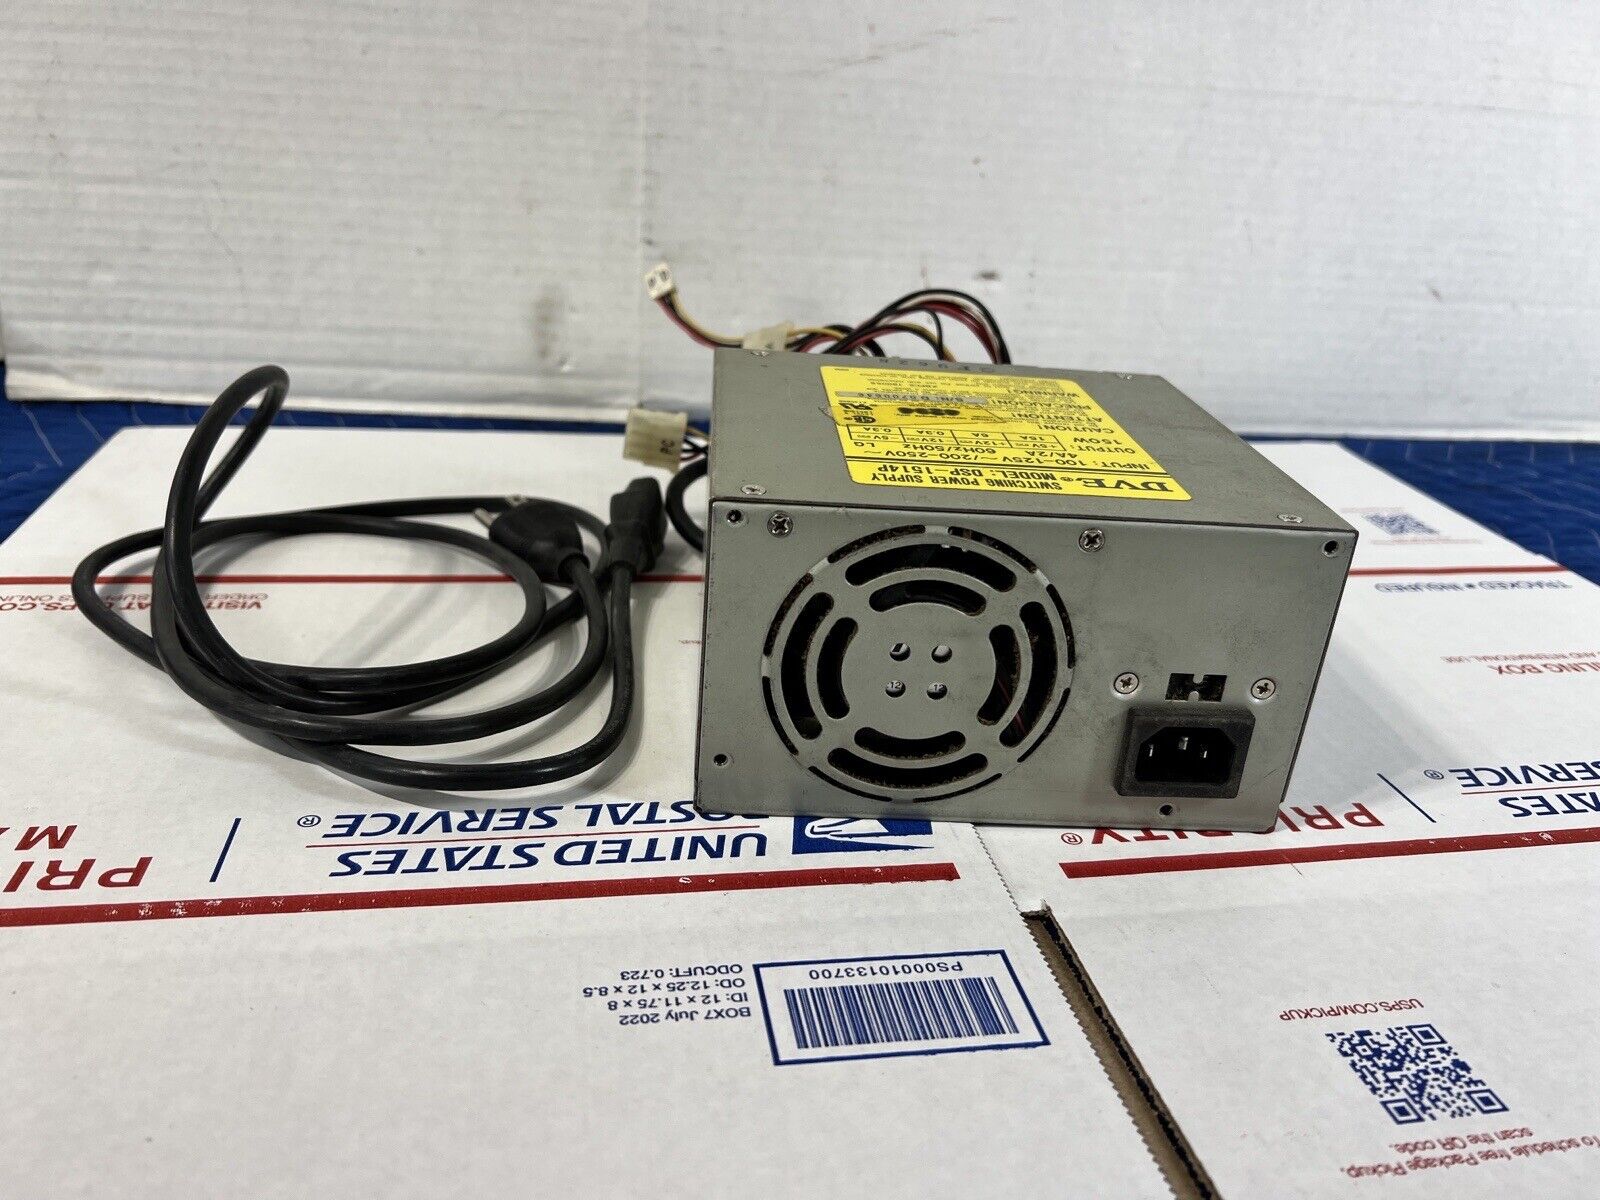 DSP-1514P DVE DSP 150W AT POWER SUPPLY W/REMOTE SWITCH FOR CASE MOUNT 150 WATT P